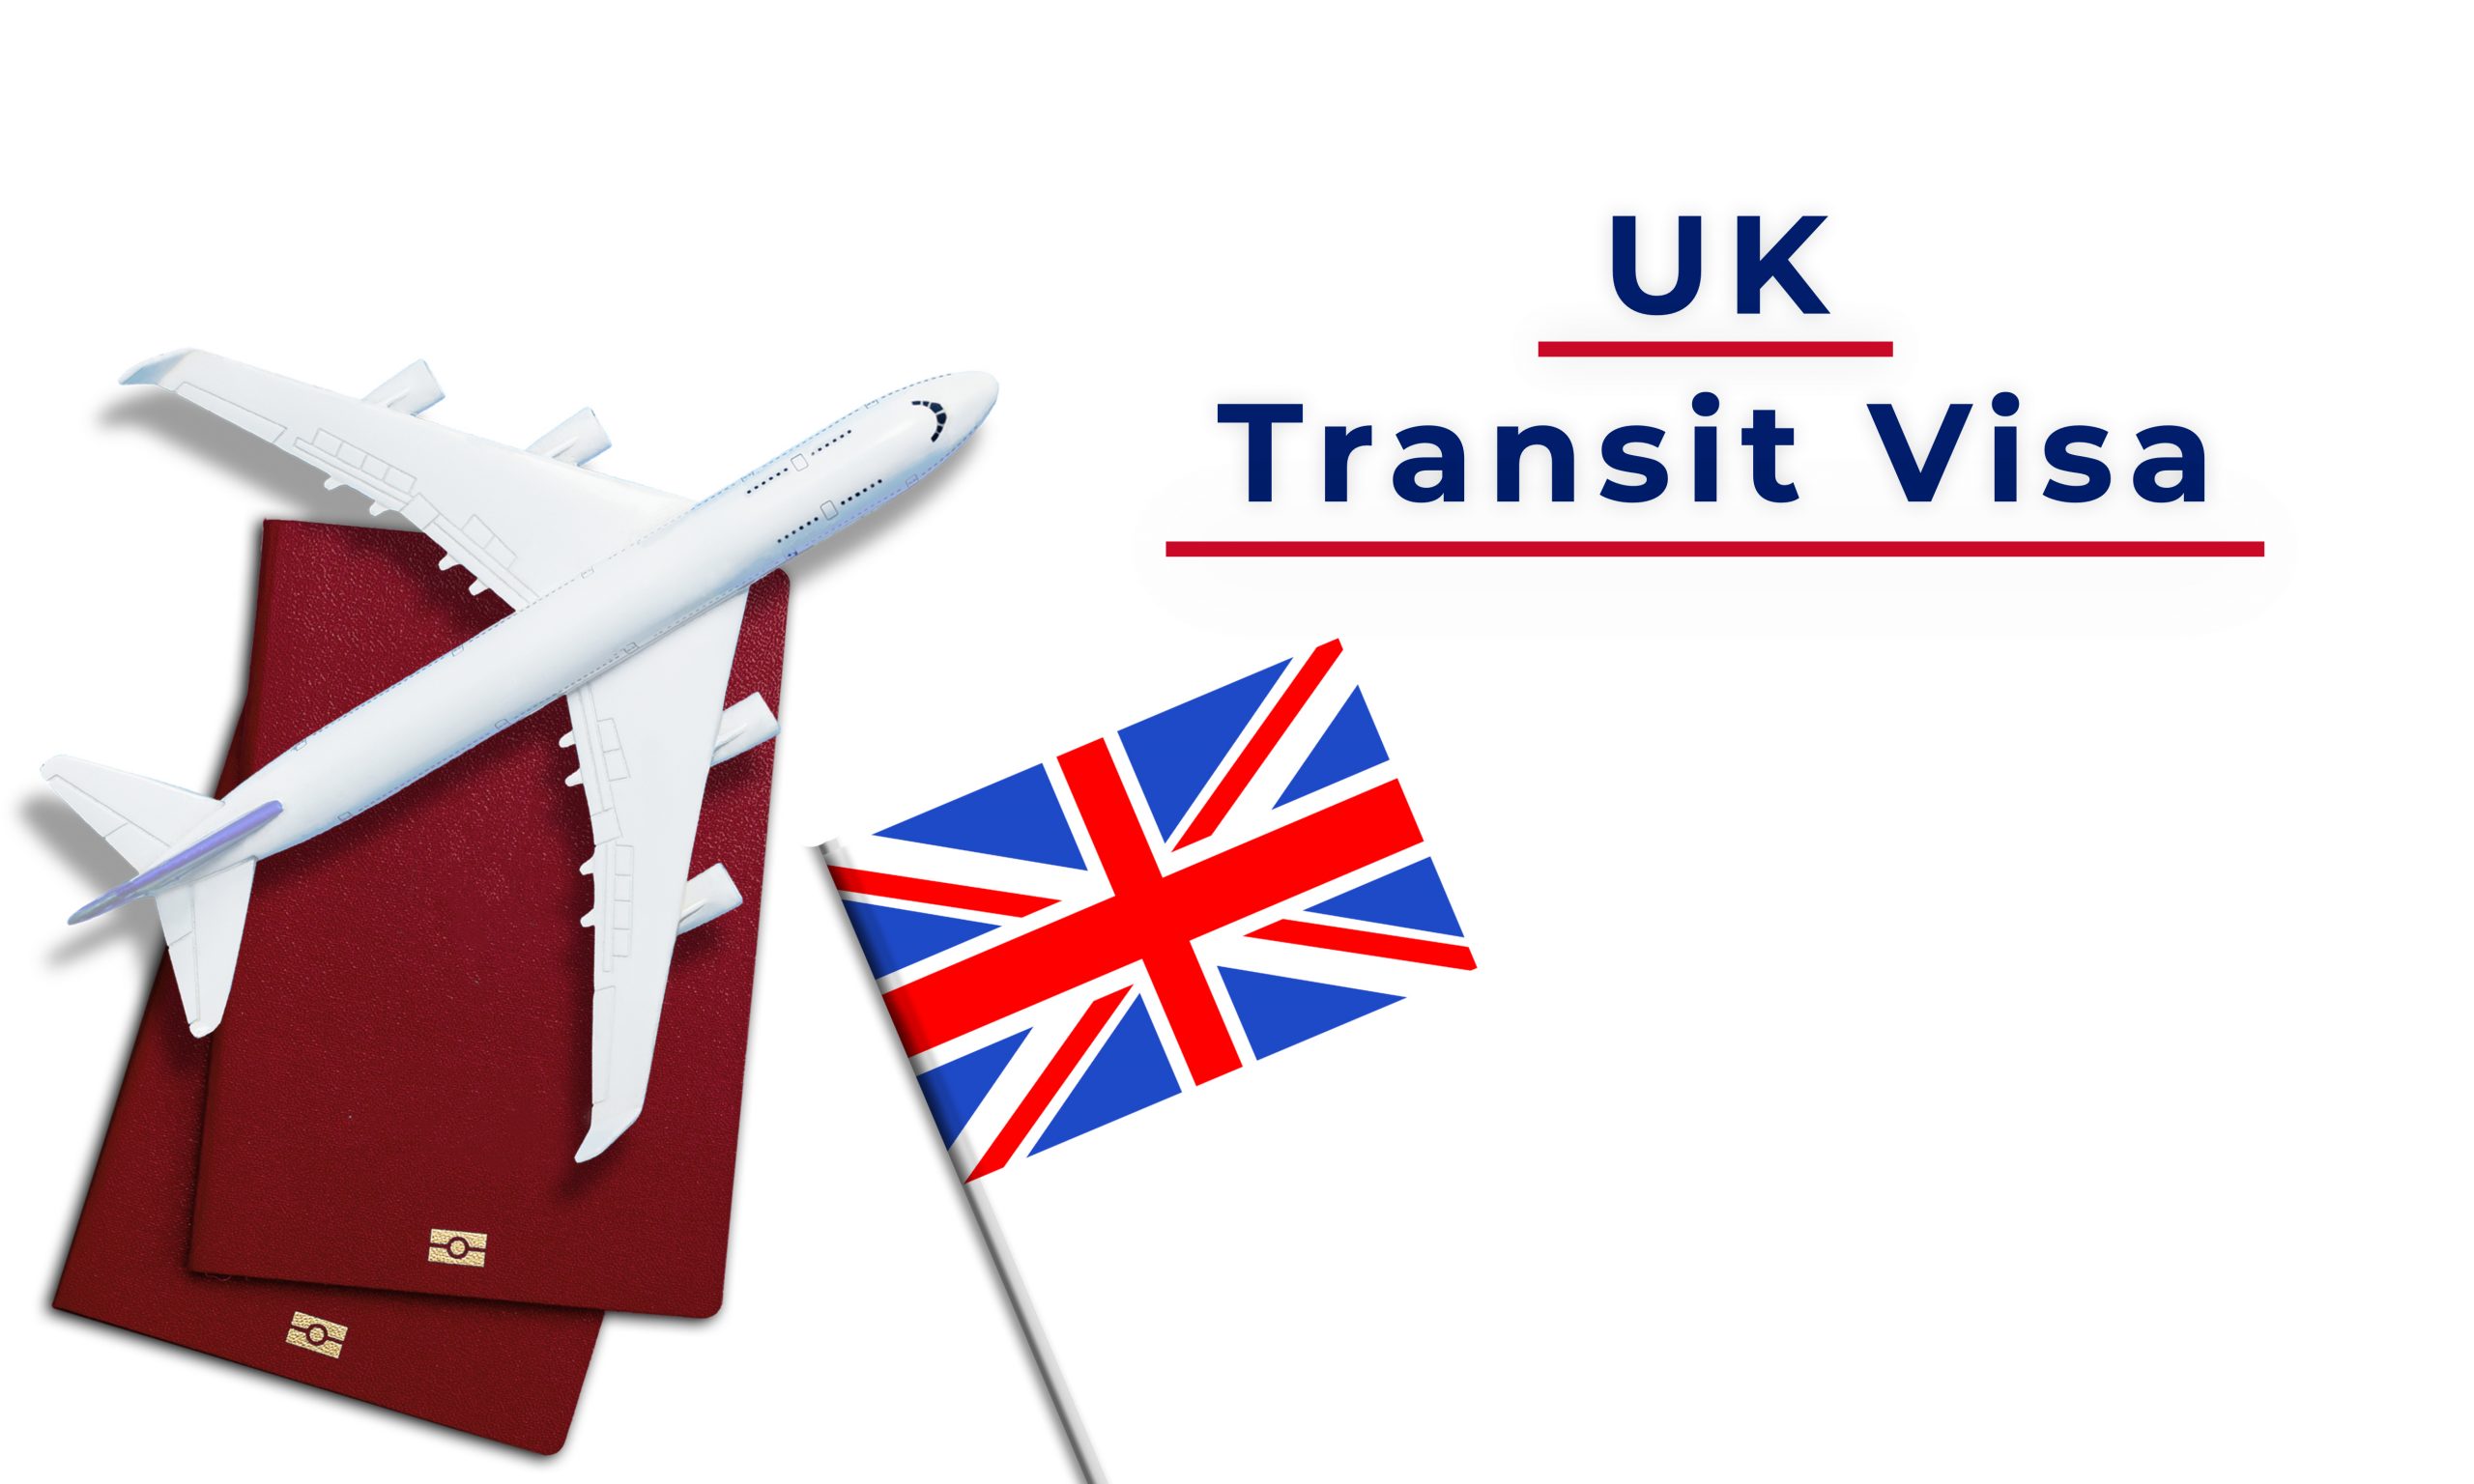 How to apply for a UK Transit Visa